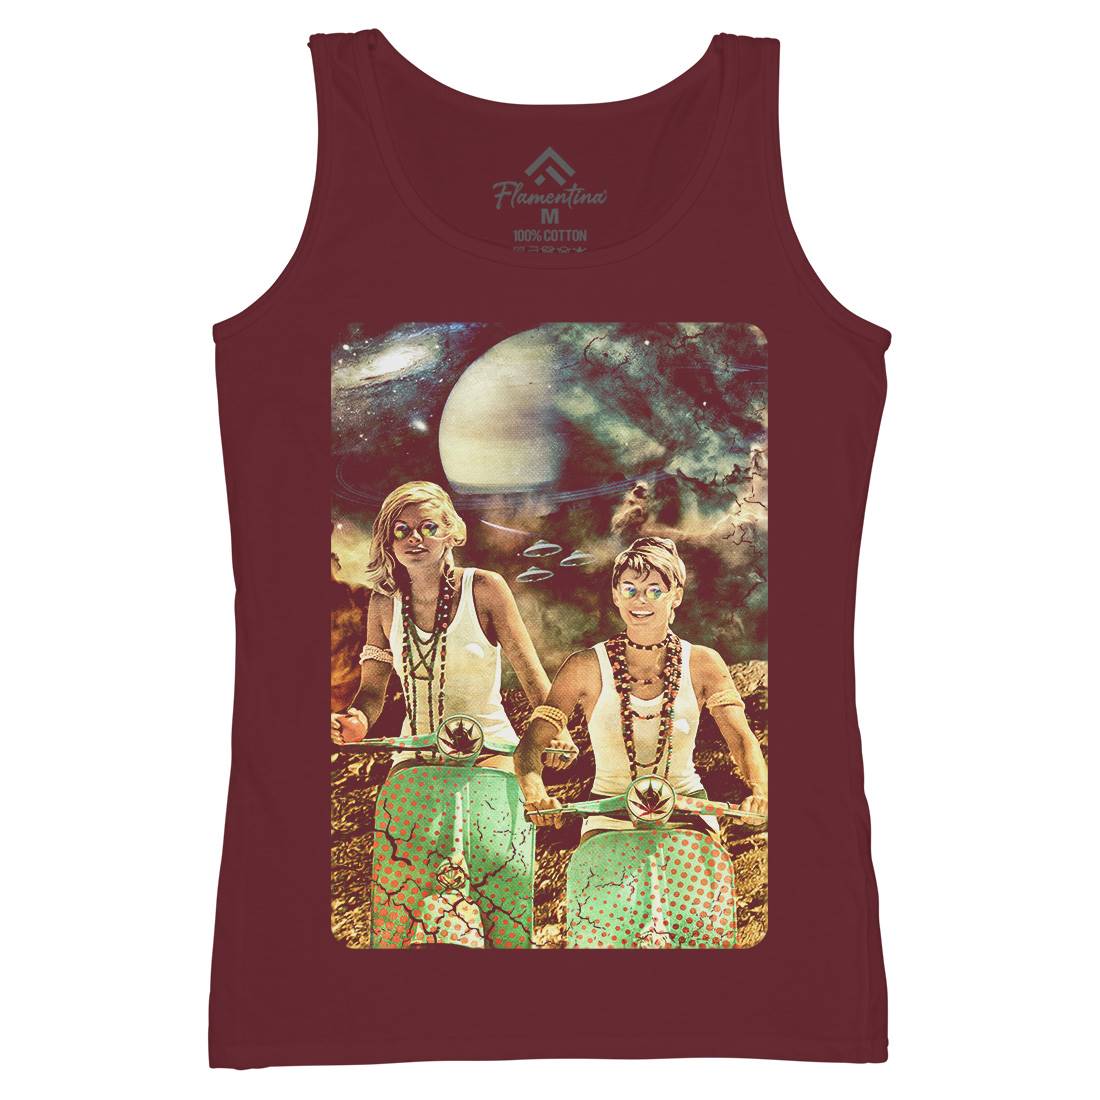 Galactic Cruise Womens Organic Tank Top Vest Space A839